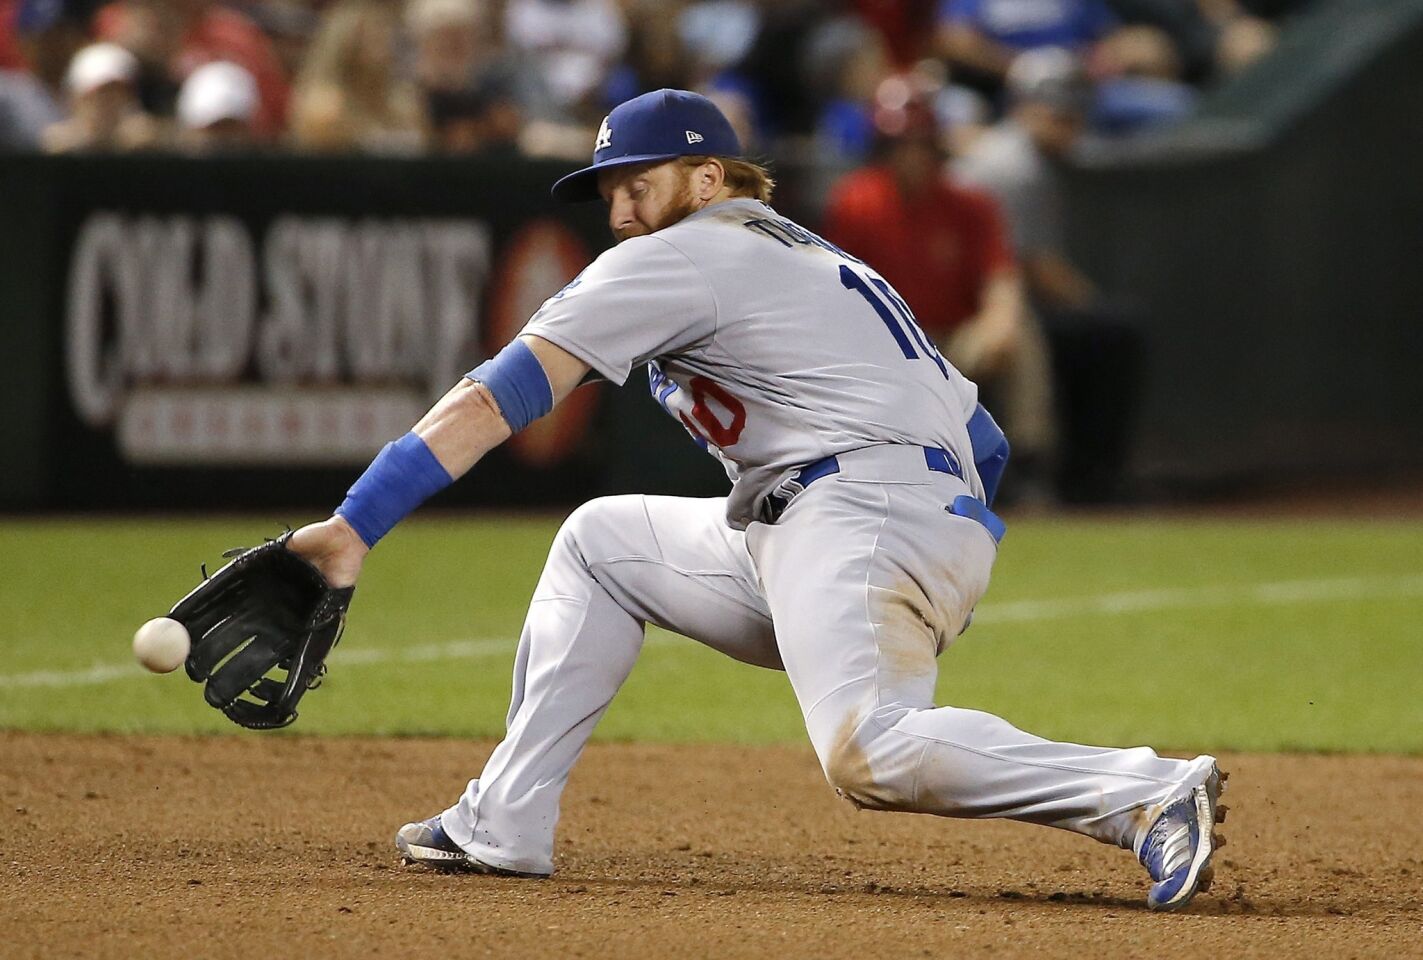 Los Angeles Dodgers third baseman Justin Turner scoops up a grounder hit by Arizona Diamondbacks' Jeff Mathis during the eighth inning of a baseball game Wednesday, Sept. 26, 2018, in Phoenix. The Diamondbacks defeated the Dodgers 7-2. (AP Photo/Ross D. Franklin)